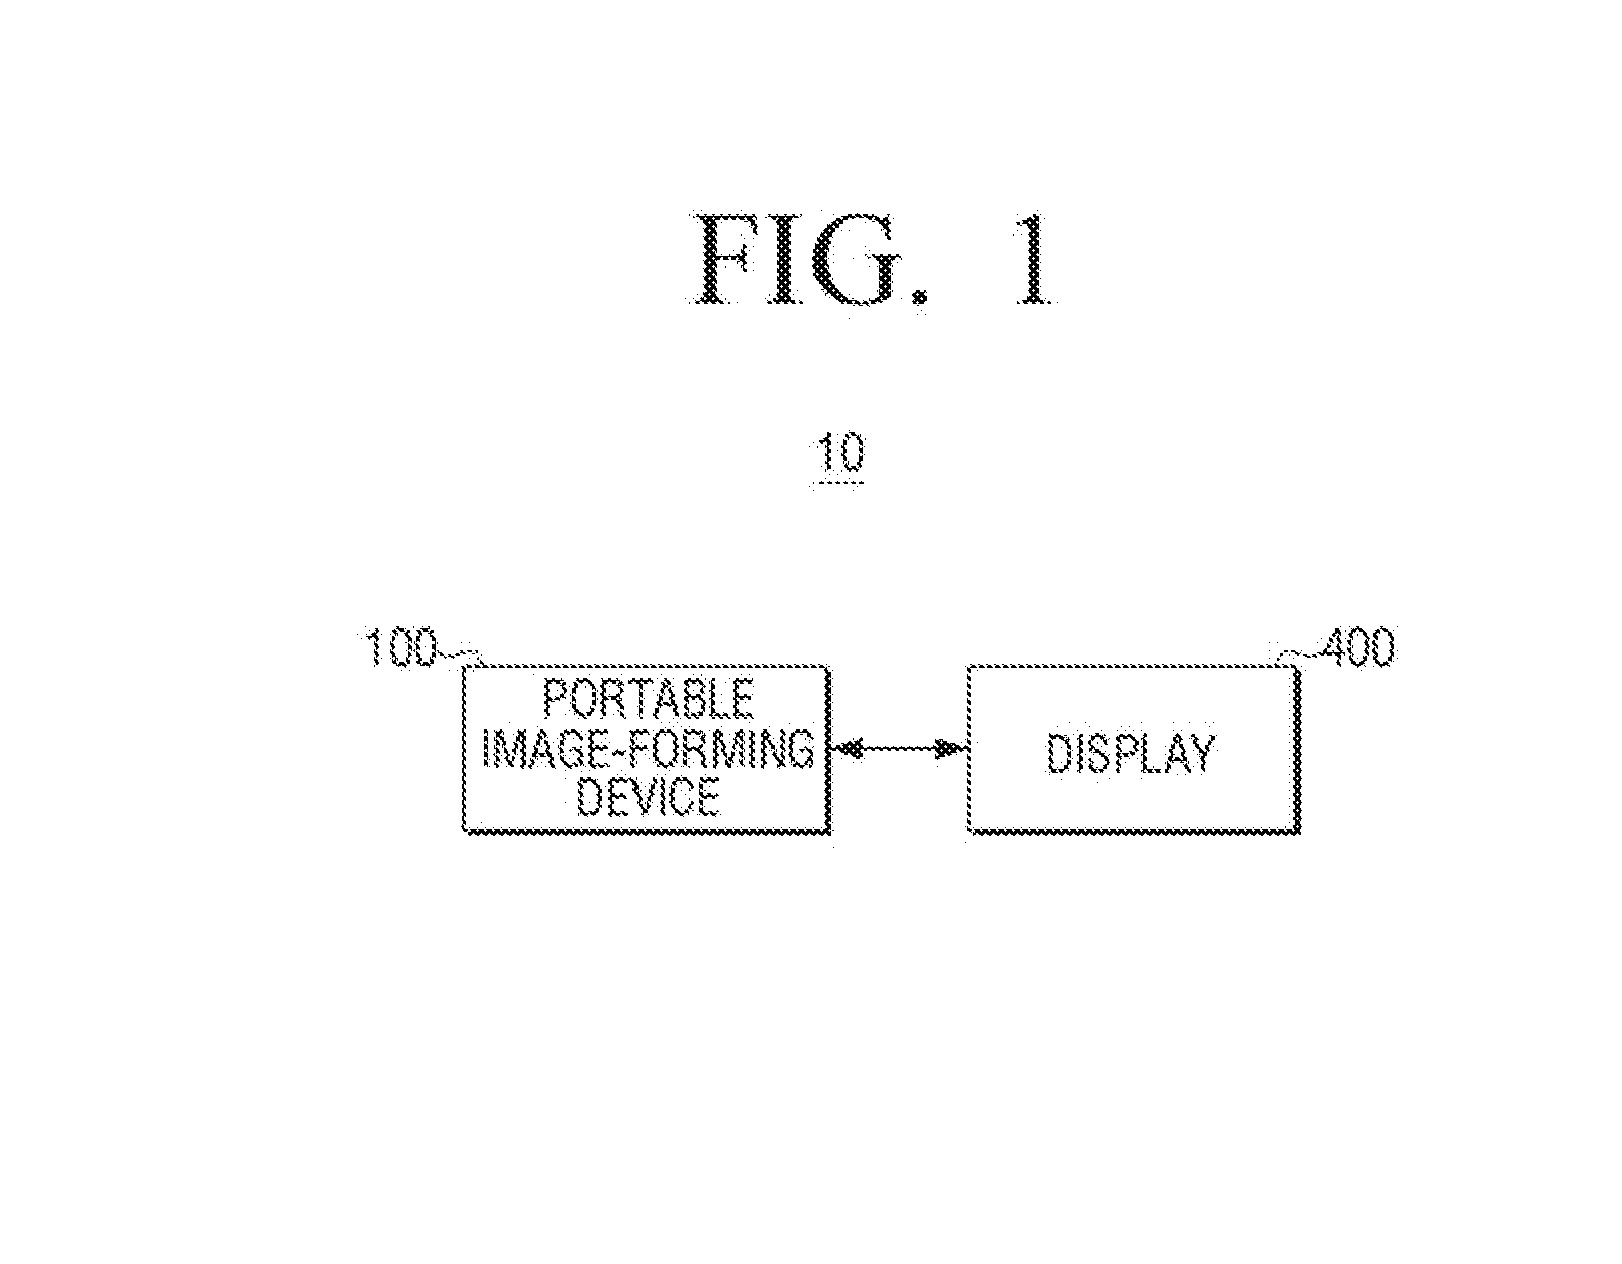 Portable image-forming device